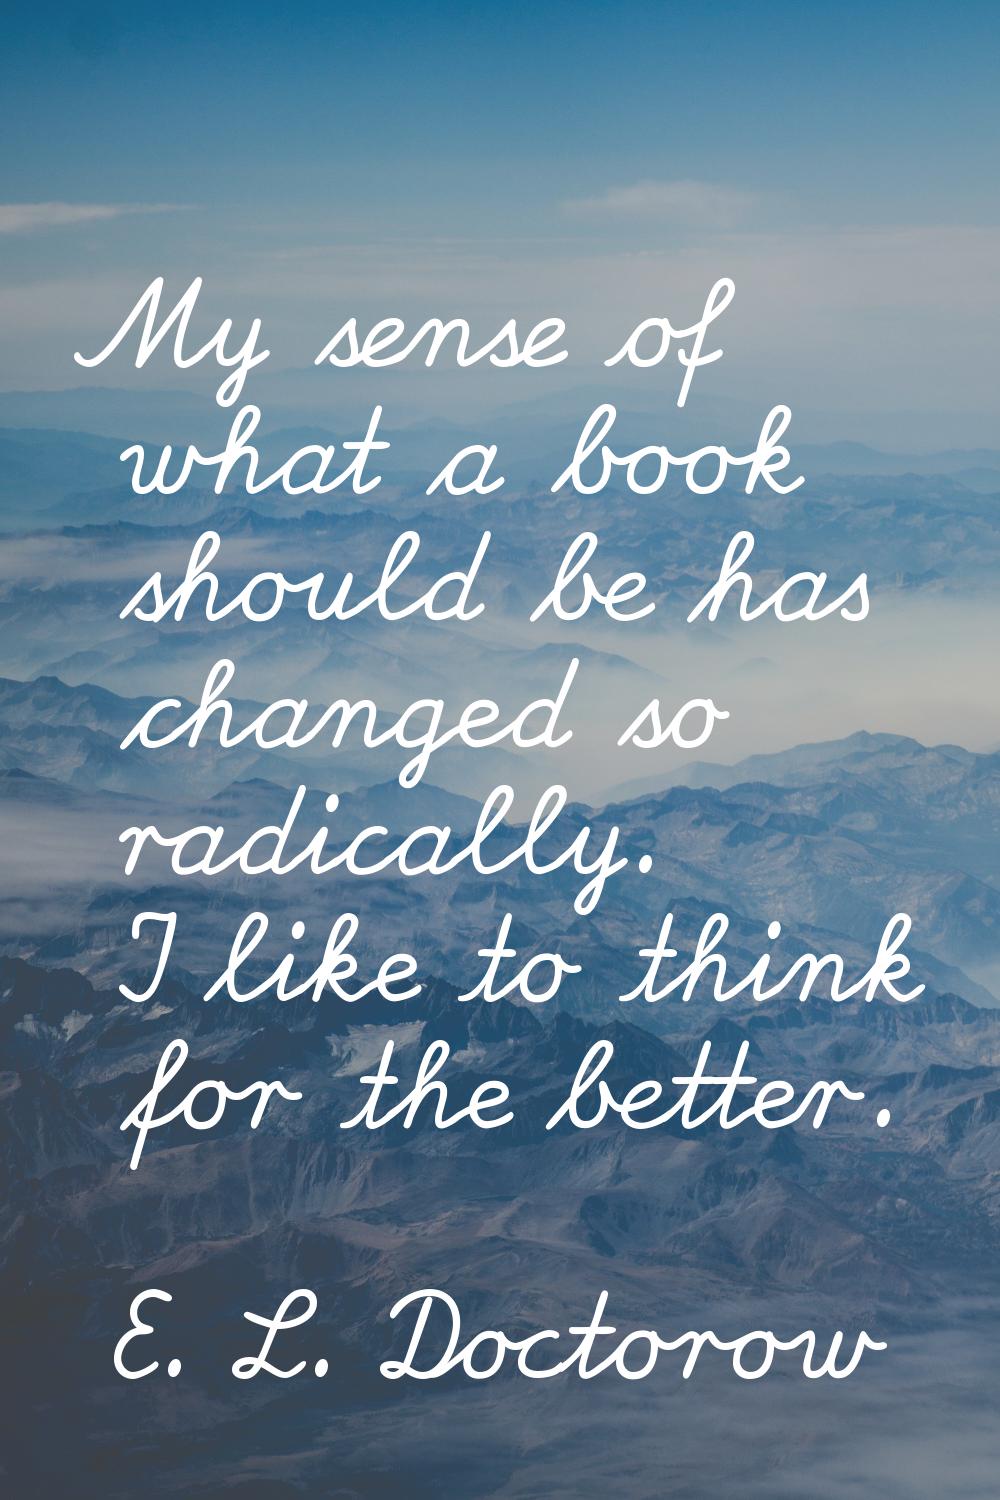 My sense of what a book should be has changed so radically. I like to think for the better.